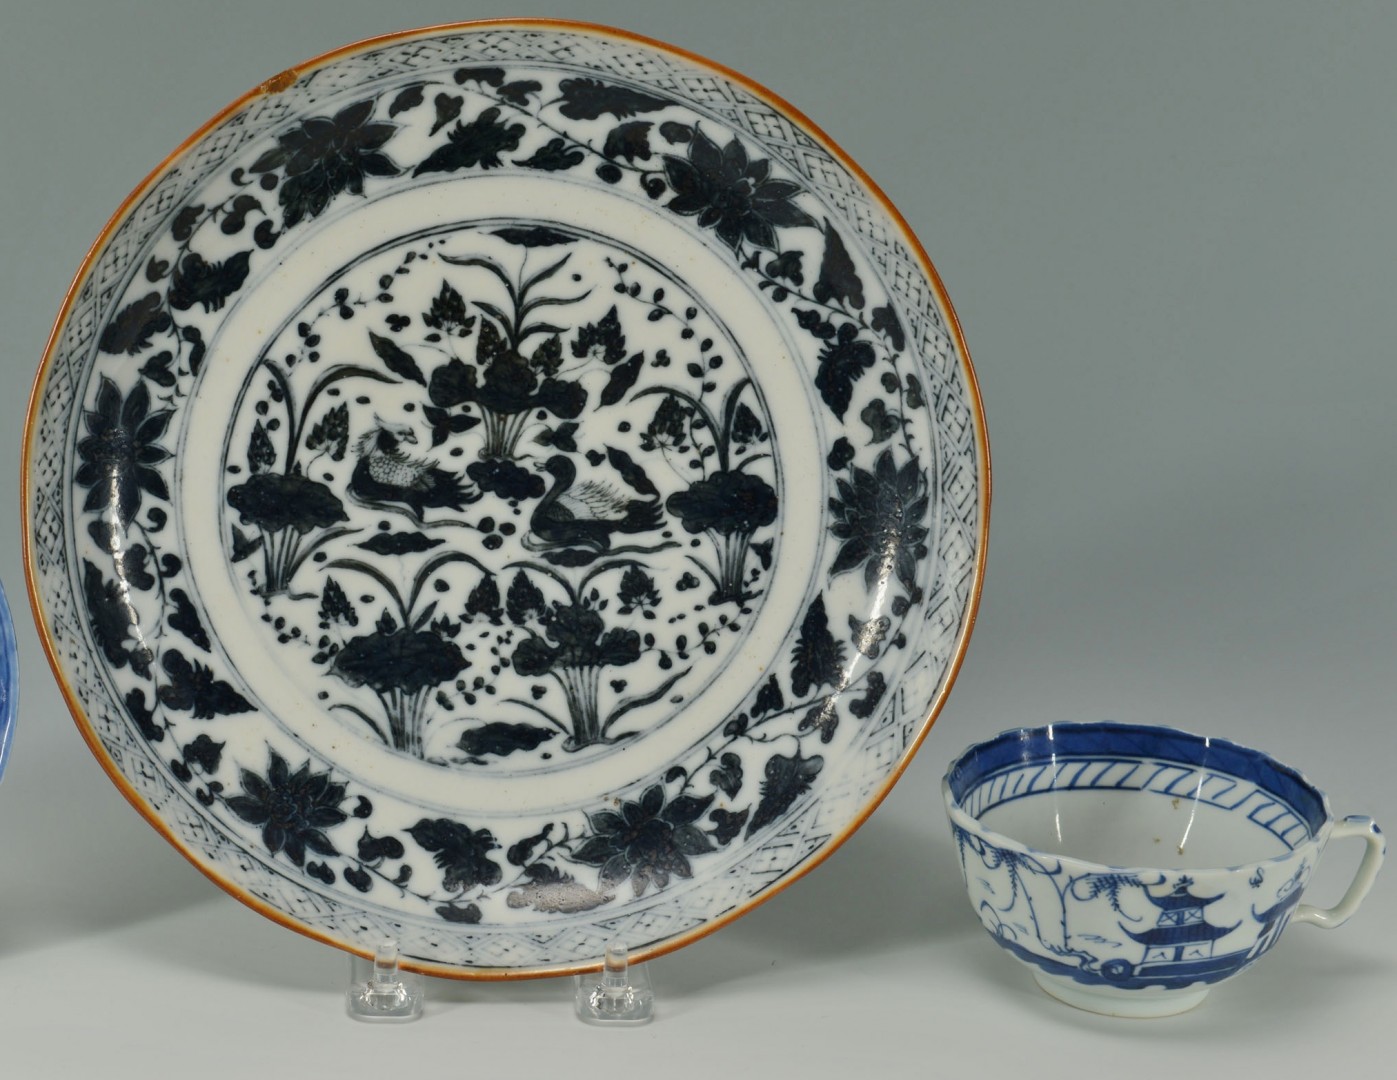 Lot 242: Grouping of 3 Chinese Porcelain Items